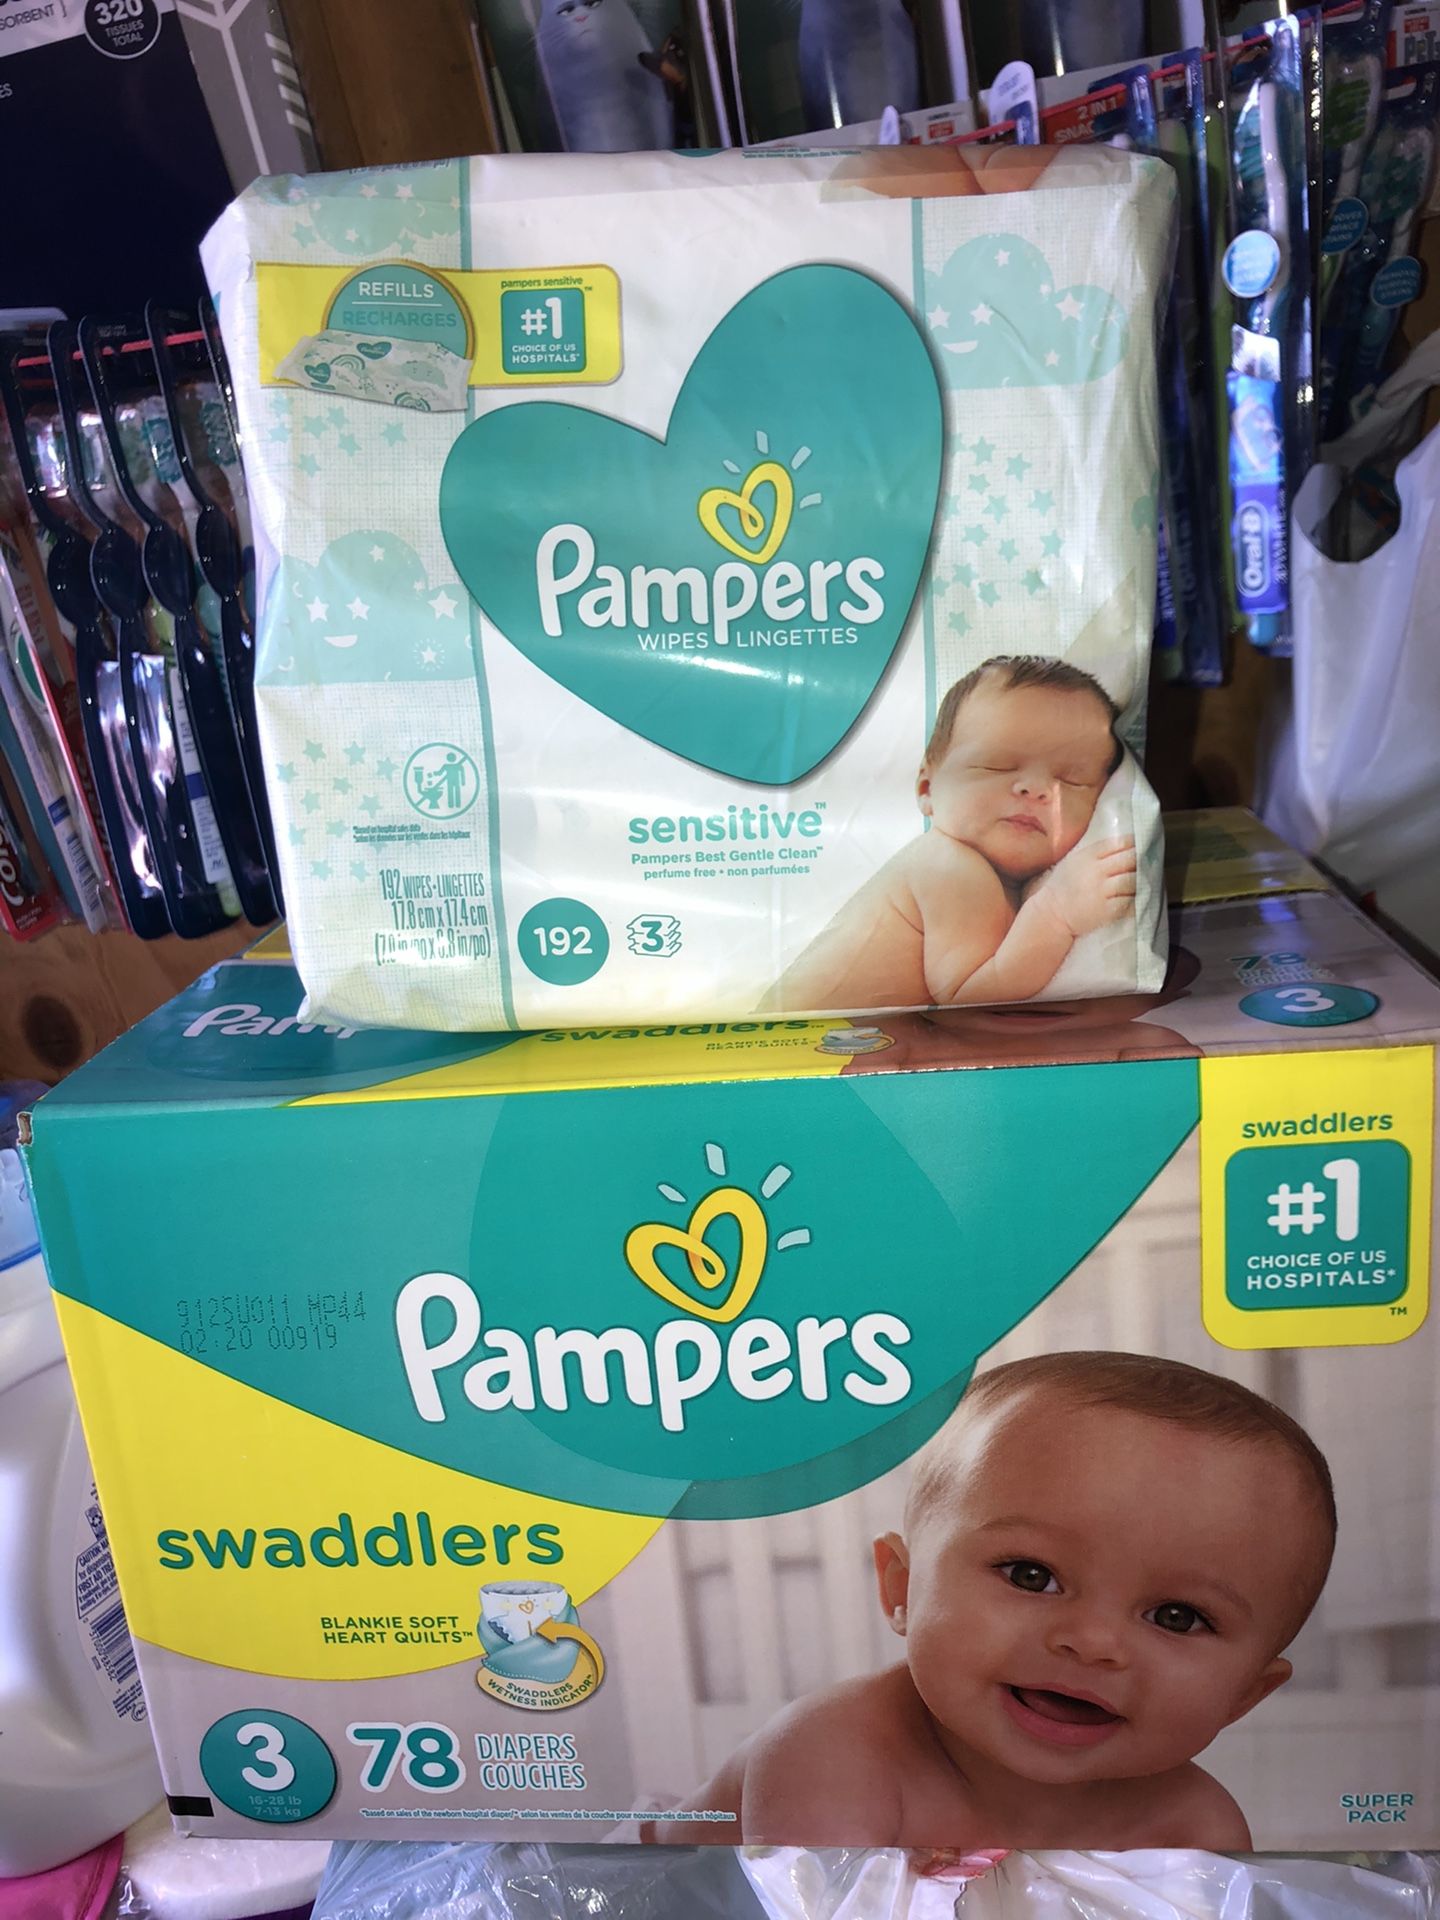 Pampers / wipes